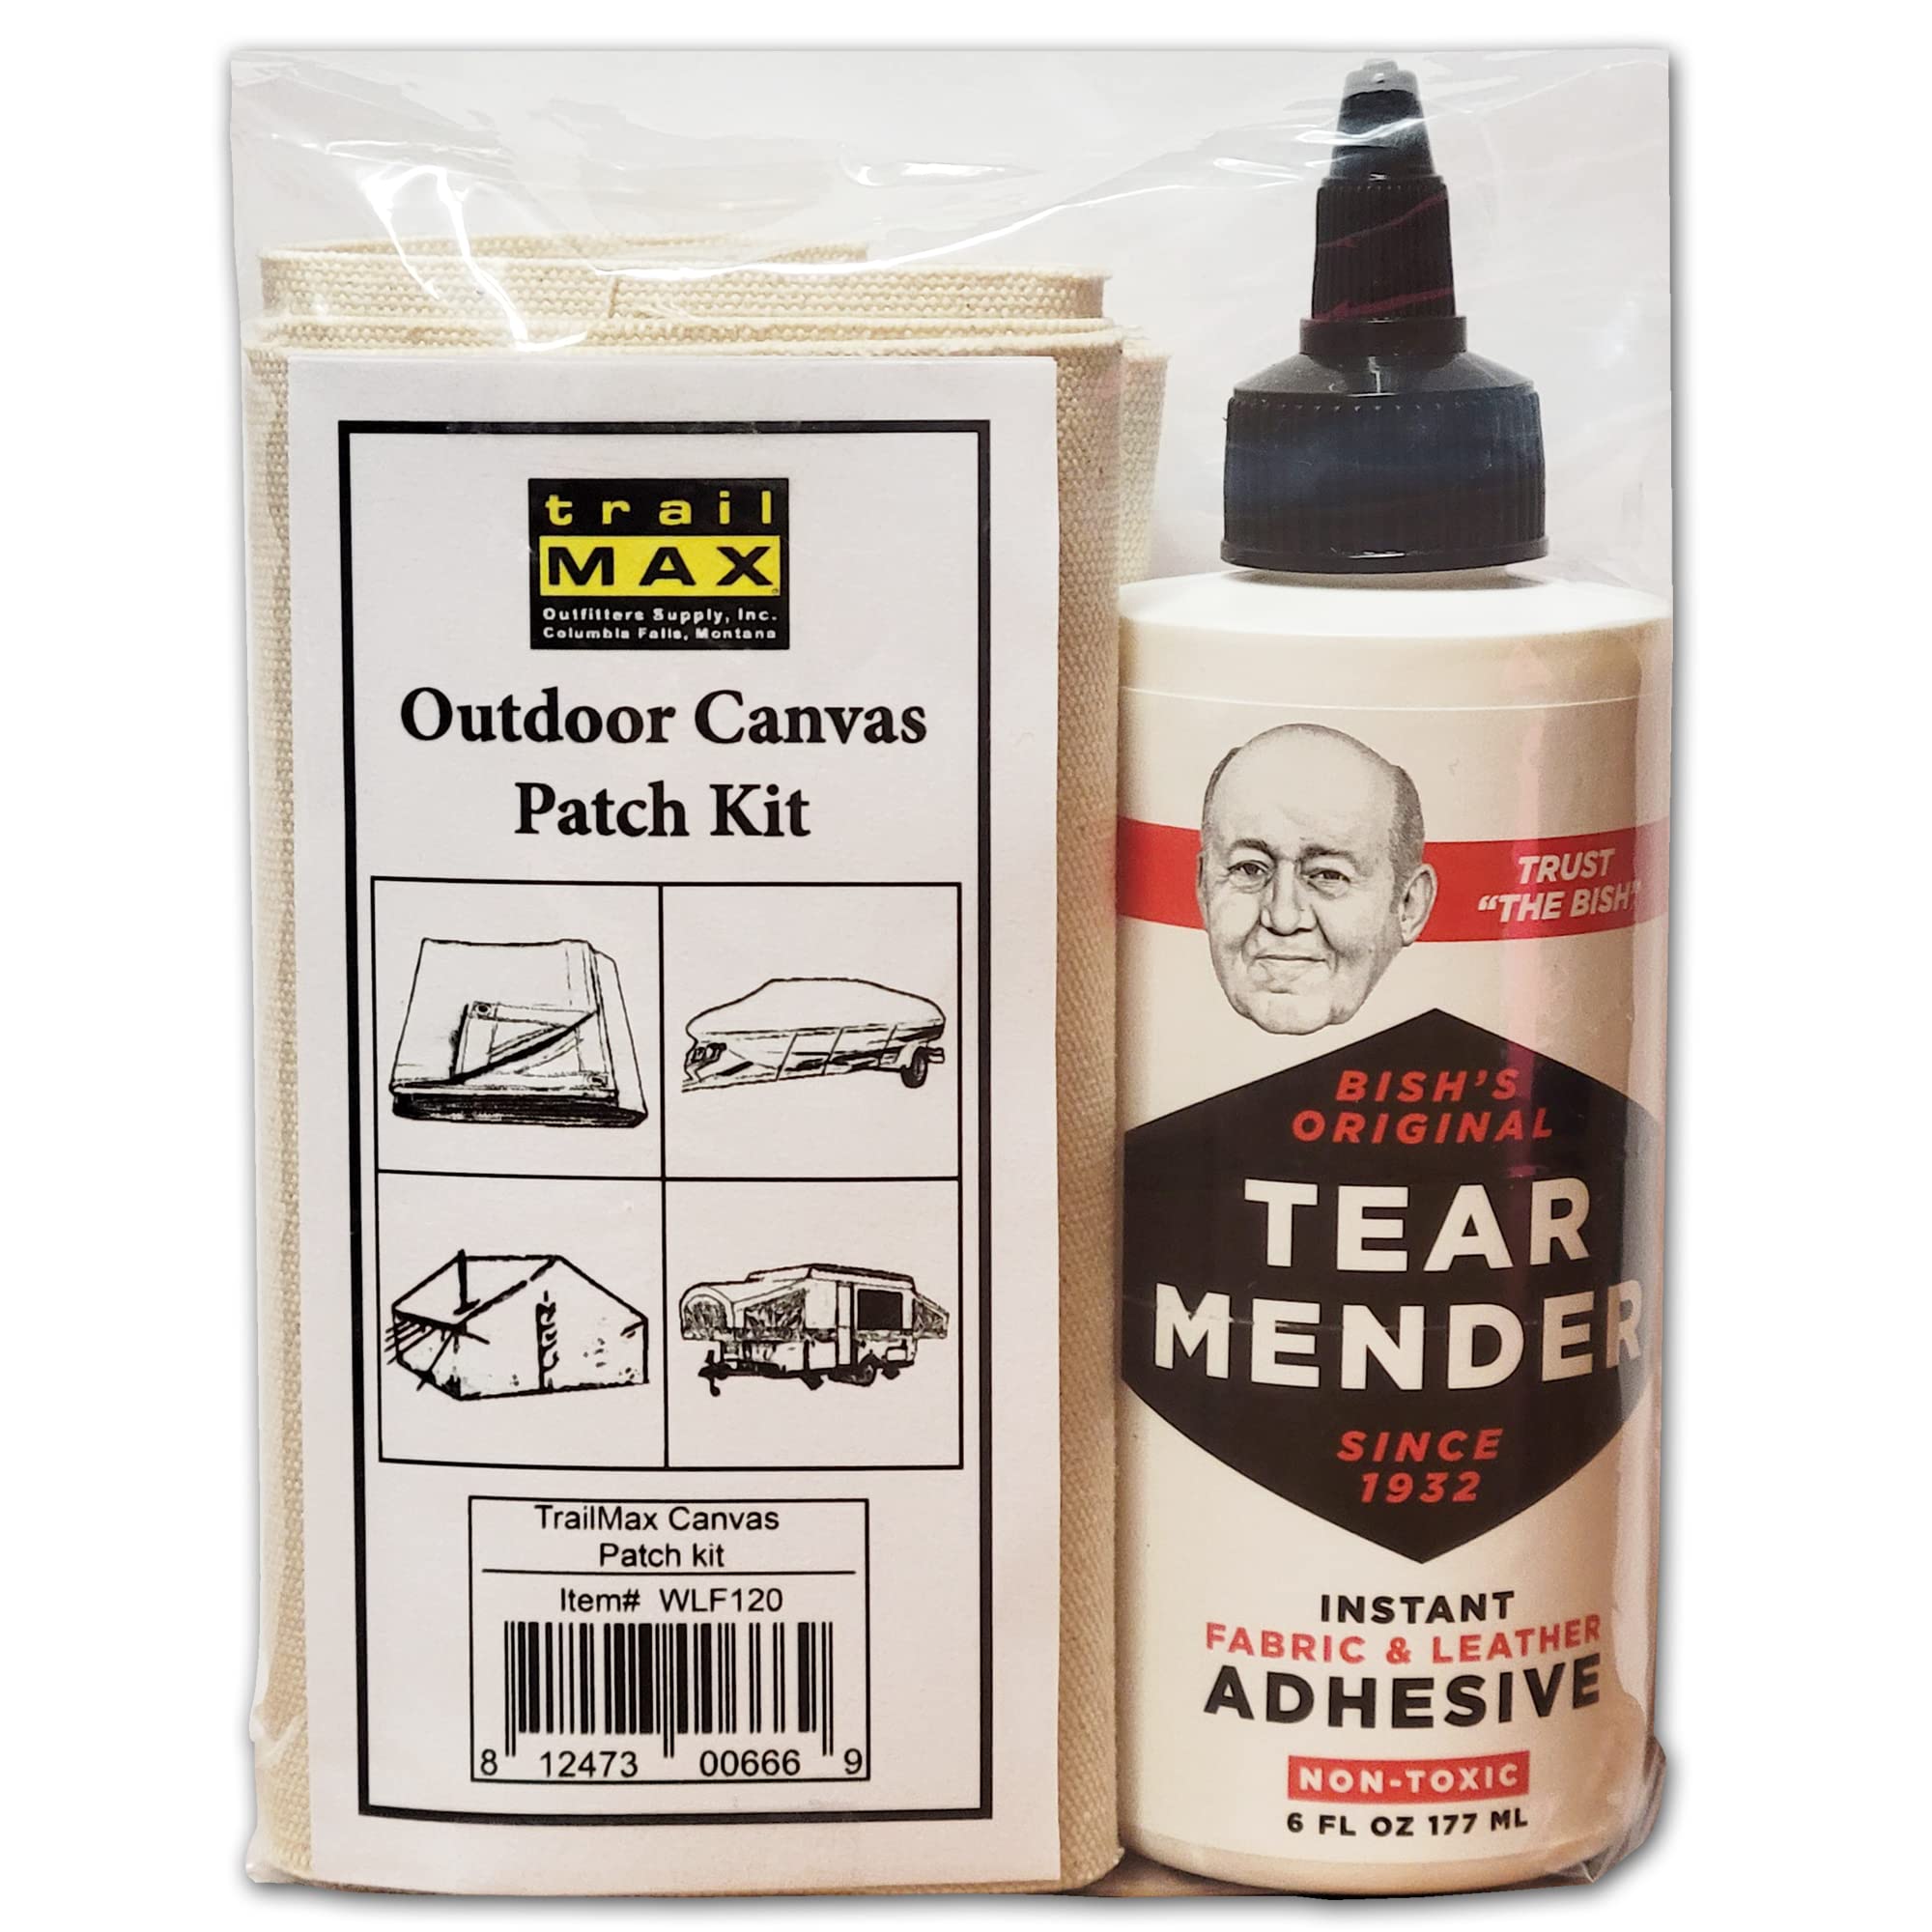 TrailMax Outdoor Canvas Patch Kit to Repair Pop-Up Campers, Canvas